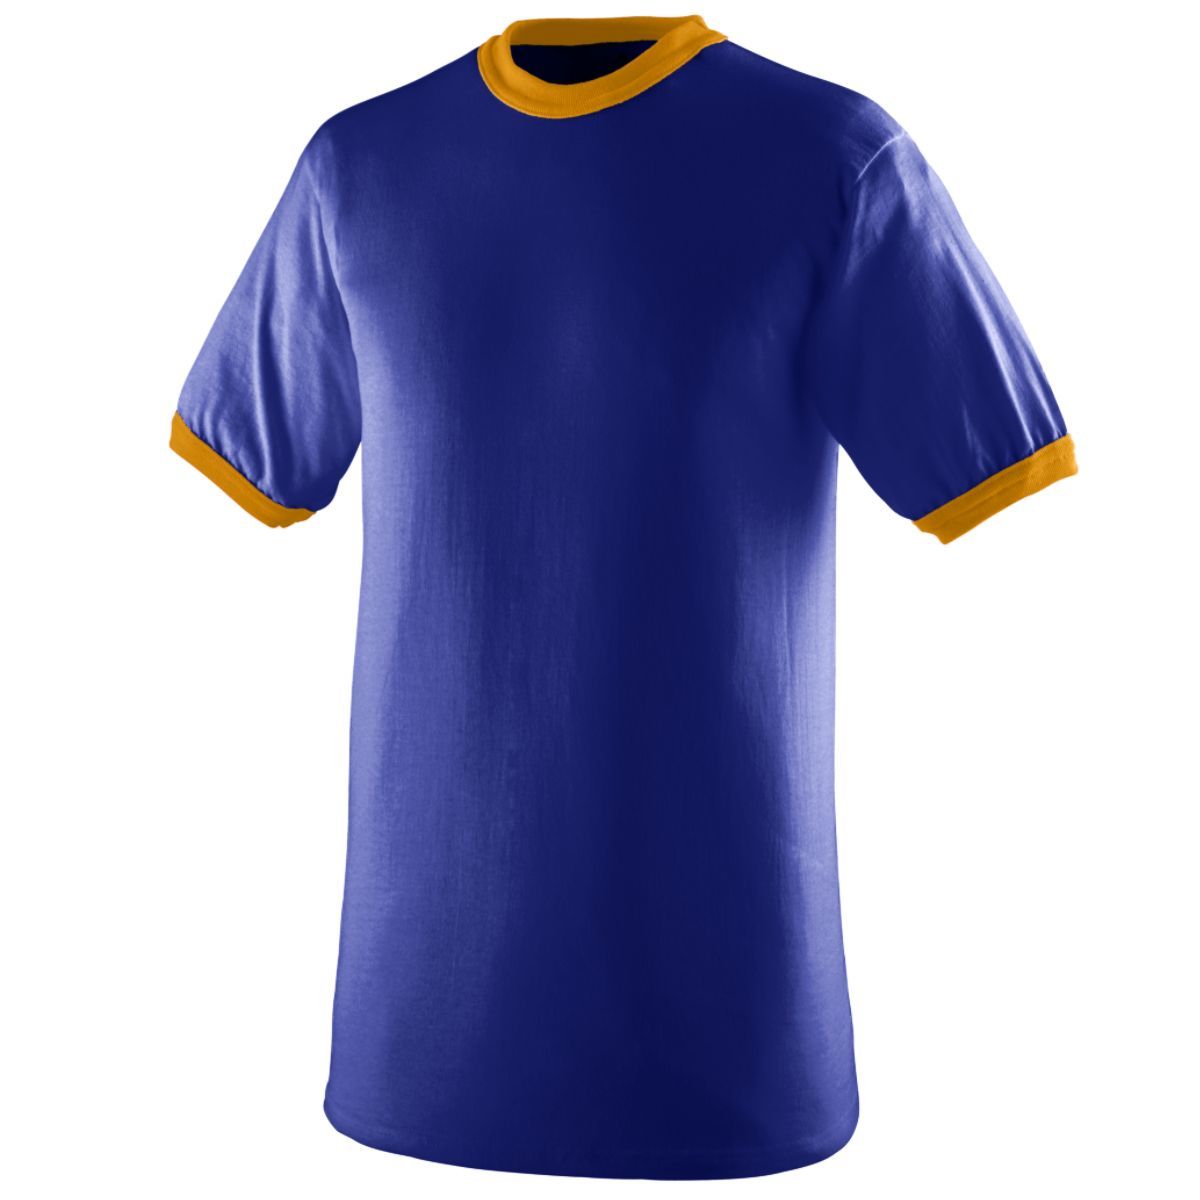 Augusta Sportswear Youth-Ringer T-Shirt in Purple/Gold  -Part of the Youth, Youth-Tee-Shirt, T-Shirts, Augusta-Products, Soccer, Shirts, All-Sports-1 product lines at KanaleyCreations.com